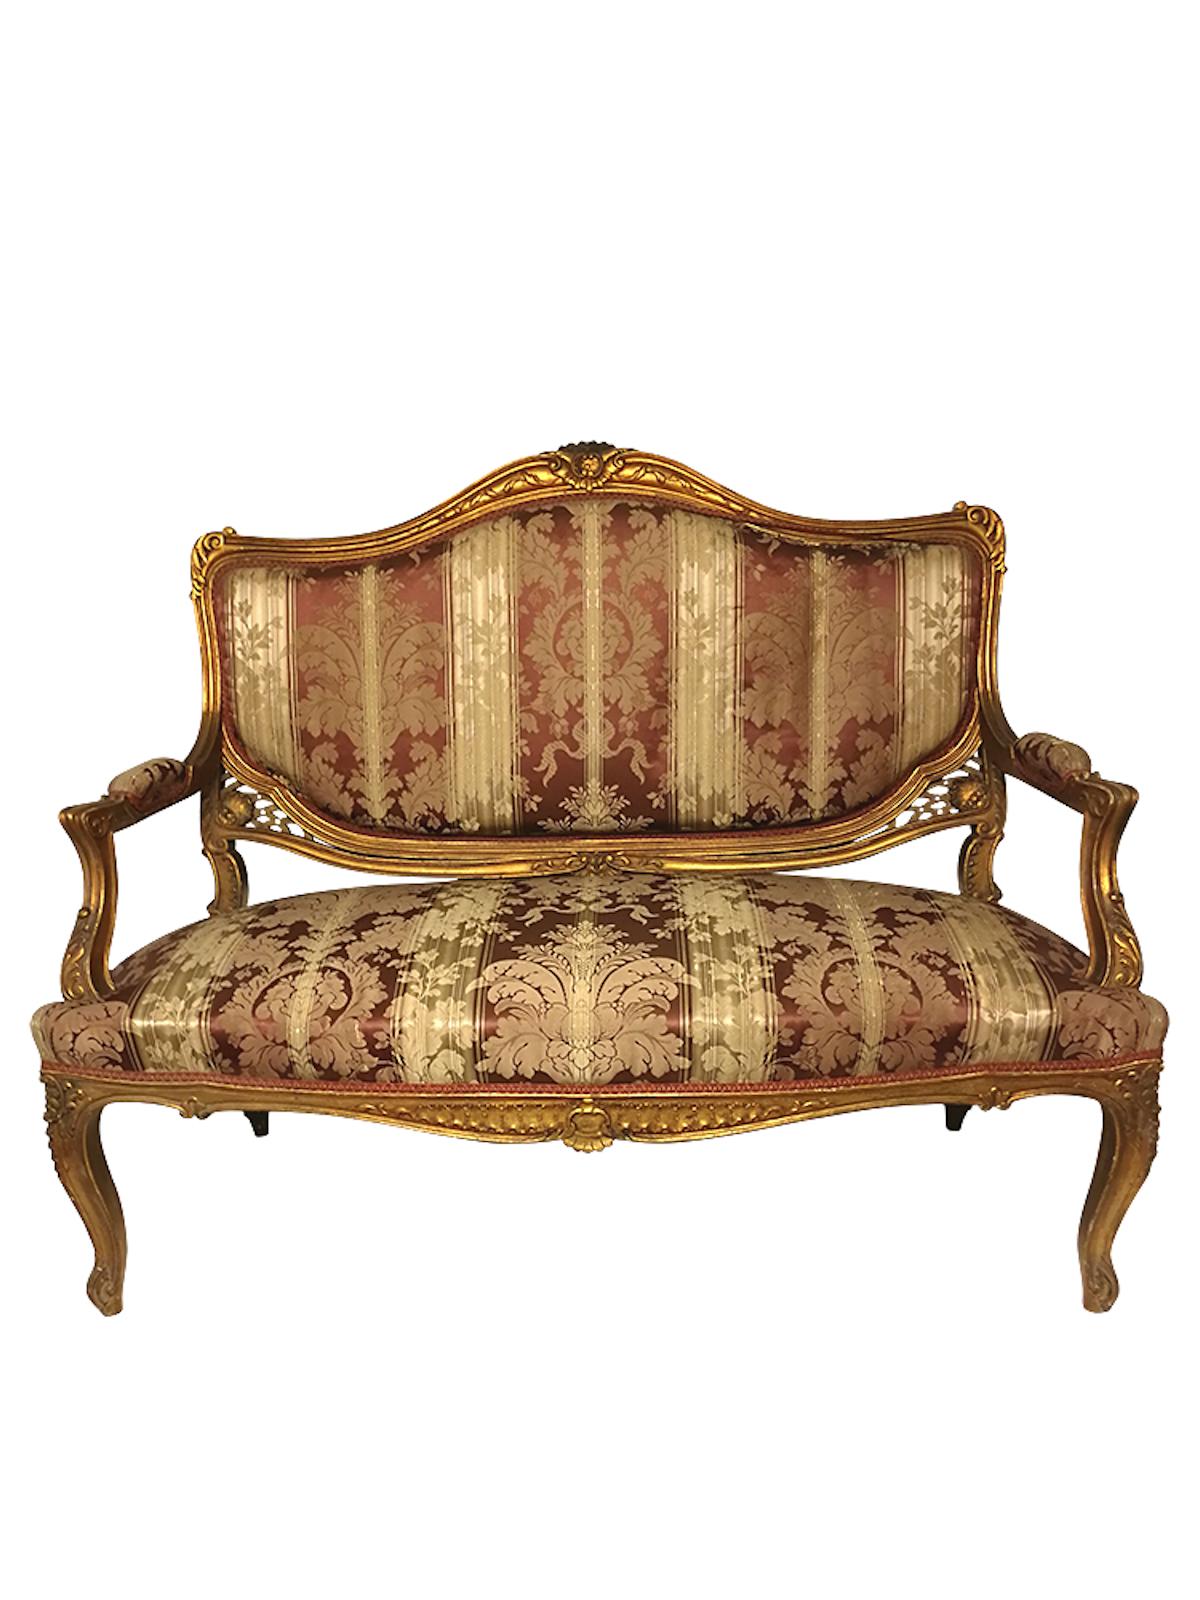 Louis XV style gilt hand carved wood canapé from the 19th century and with silk upholstery of the period.
Origin: France.
Period: 19th century, Napoleon III period.